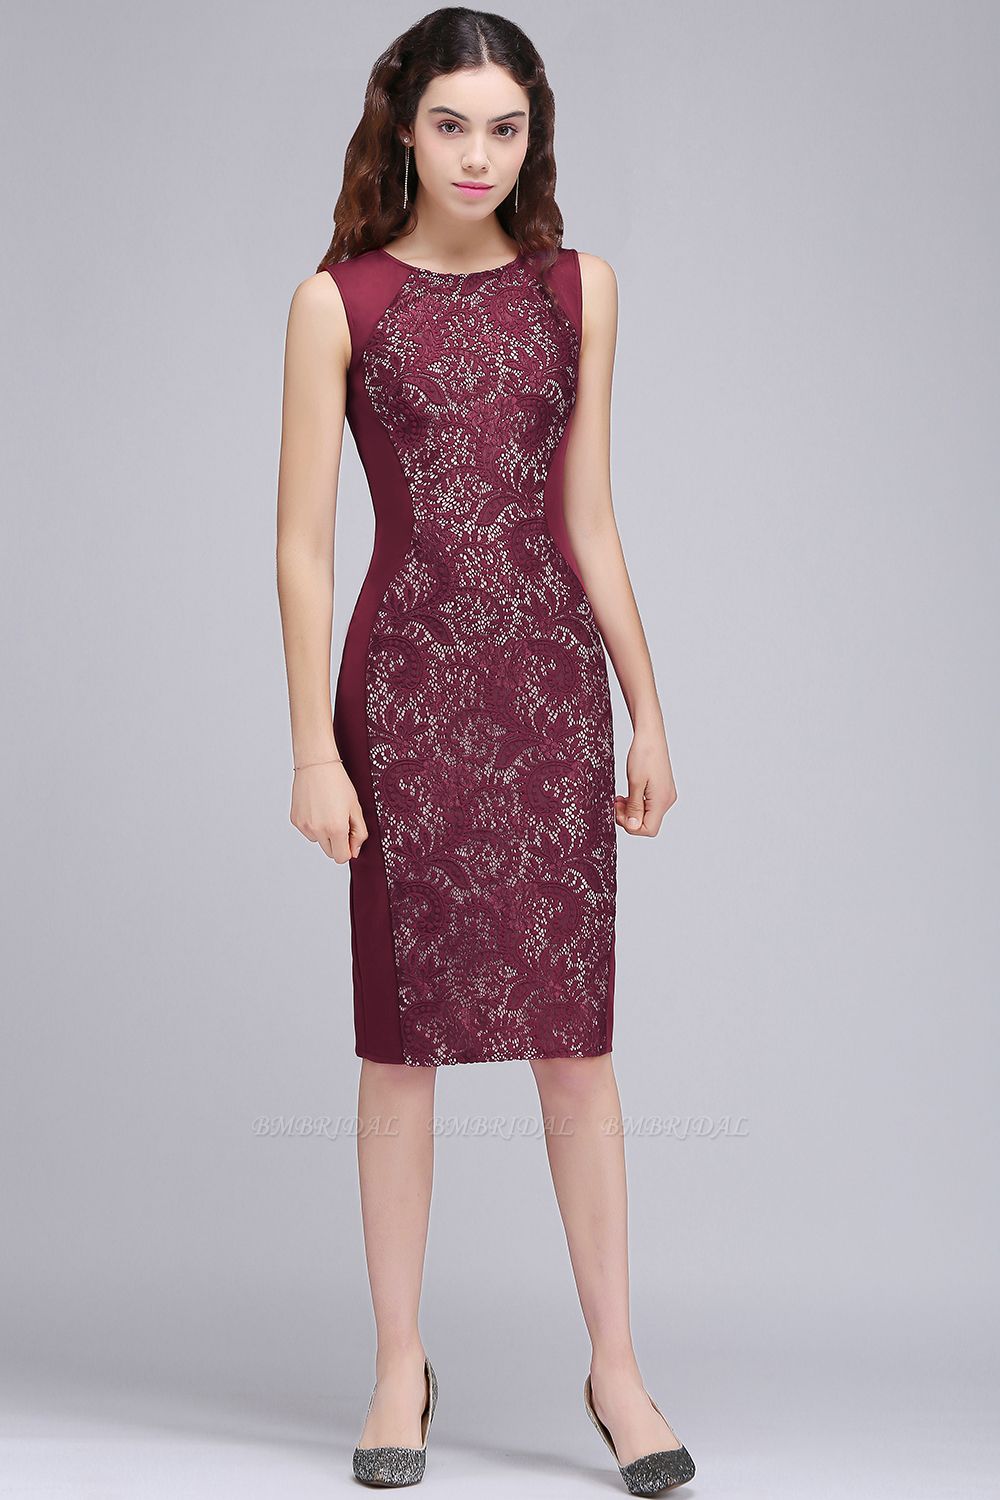 BMbridal Burgungdy Cap Sleeve Lace Mermaid Homecoming Cocktail Party Dress